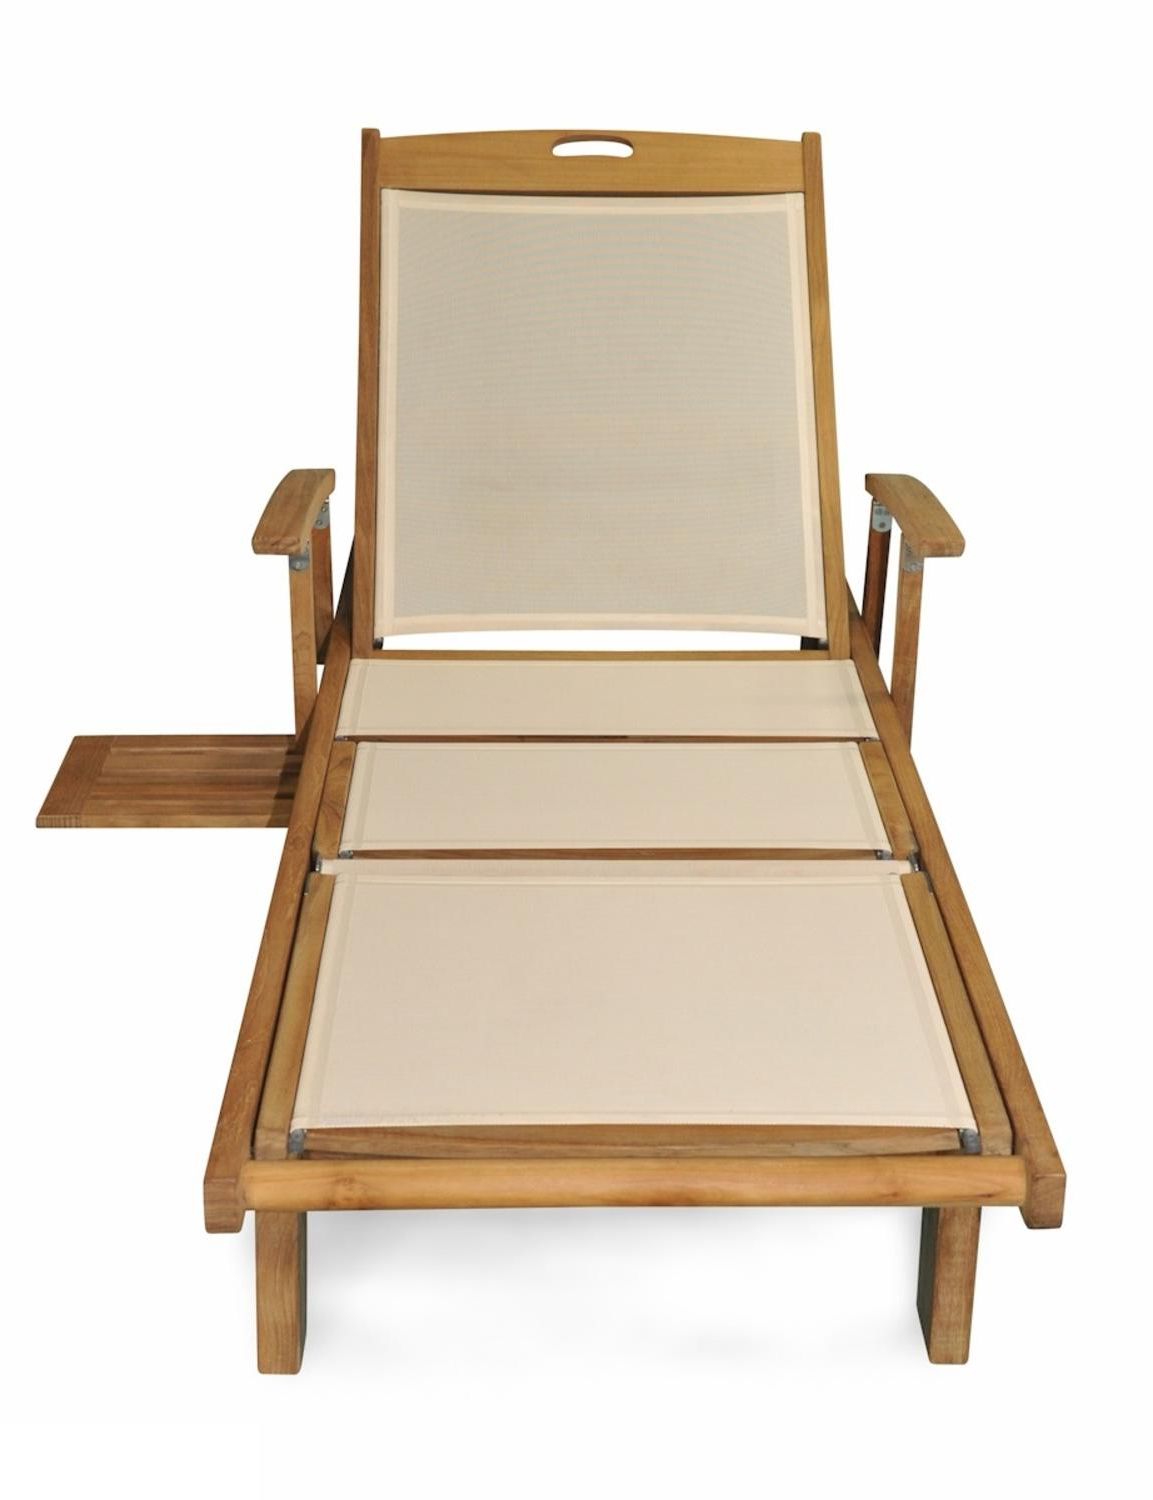 Most Popular Natural Wood Outdoor Lounger Chairs Regarding 80" Natural Teak Outdoor Patio Wooden Cream Colored Batyline Chaise (View 8 of 15)